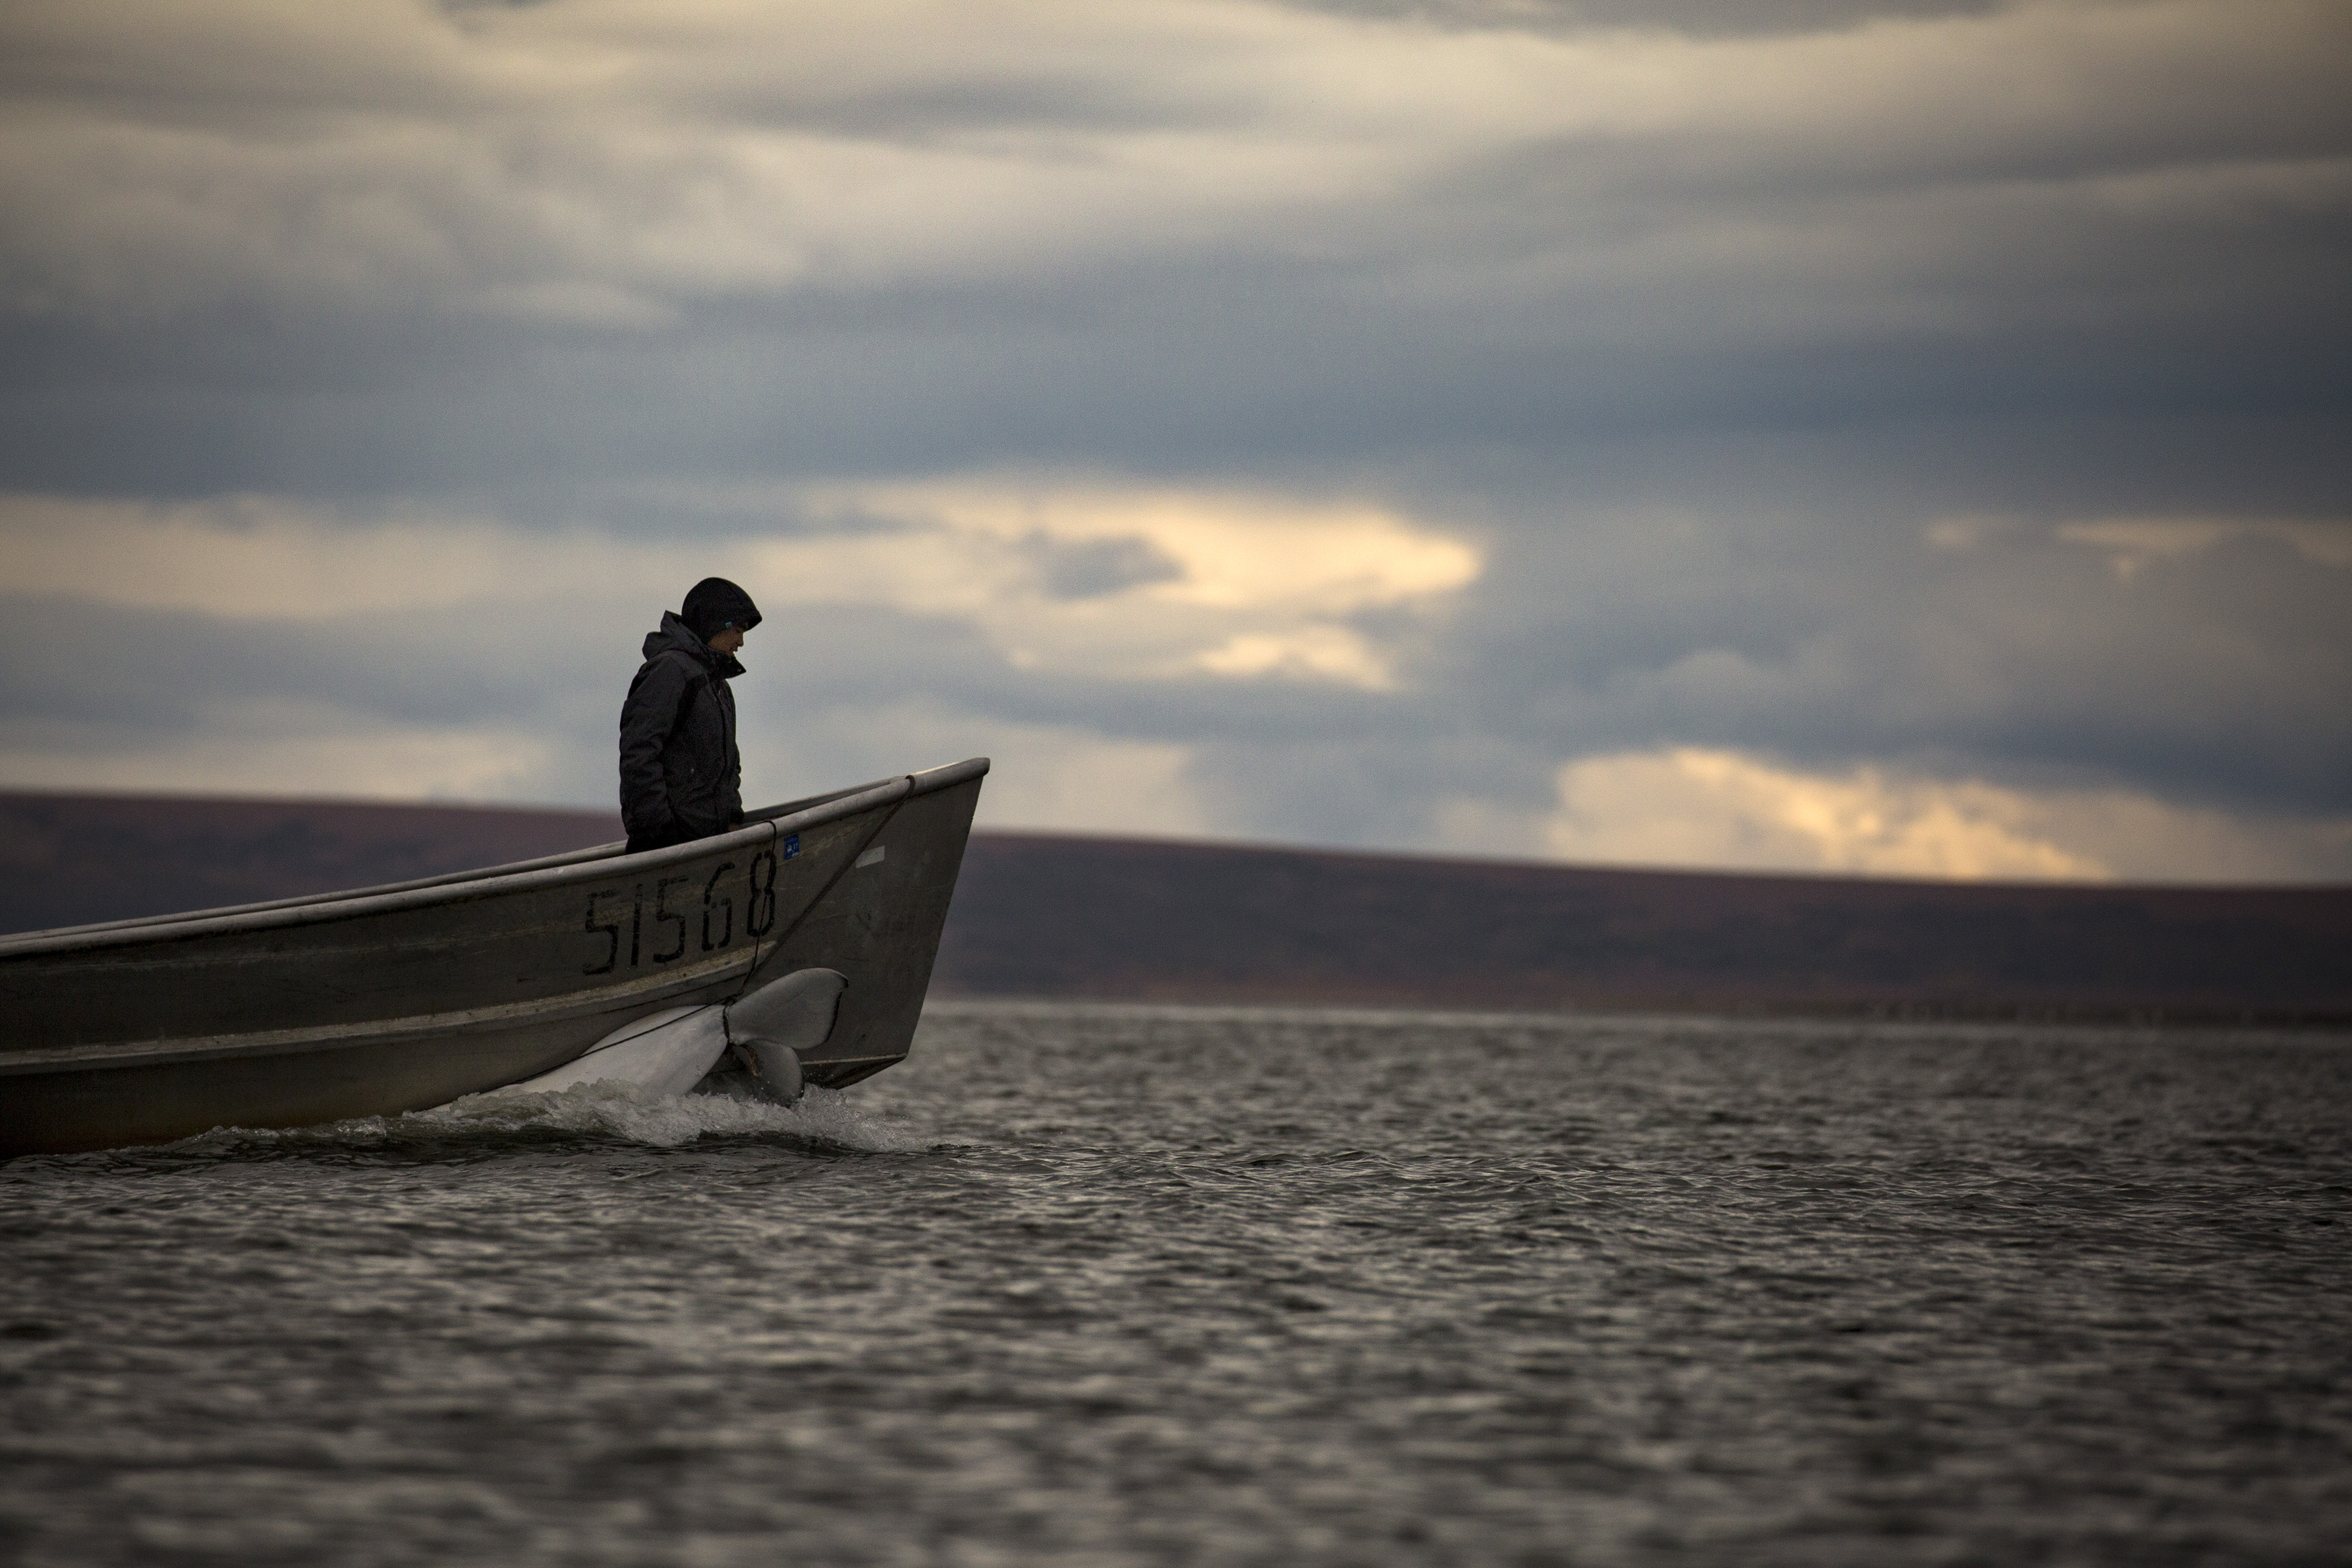 A Shaktoolik, Alaska resident returns to shore with a beluga whale lashed to the side of the boat, Sept. 17, 2016. The government has identified at least 31 Alaskan towns and cities at imminent risk of destruction from flooding and erosion due to the changing climate, with Shaktoolik ranking among the top four. (Josh Haner/The New York Times)